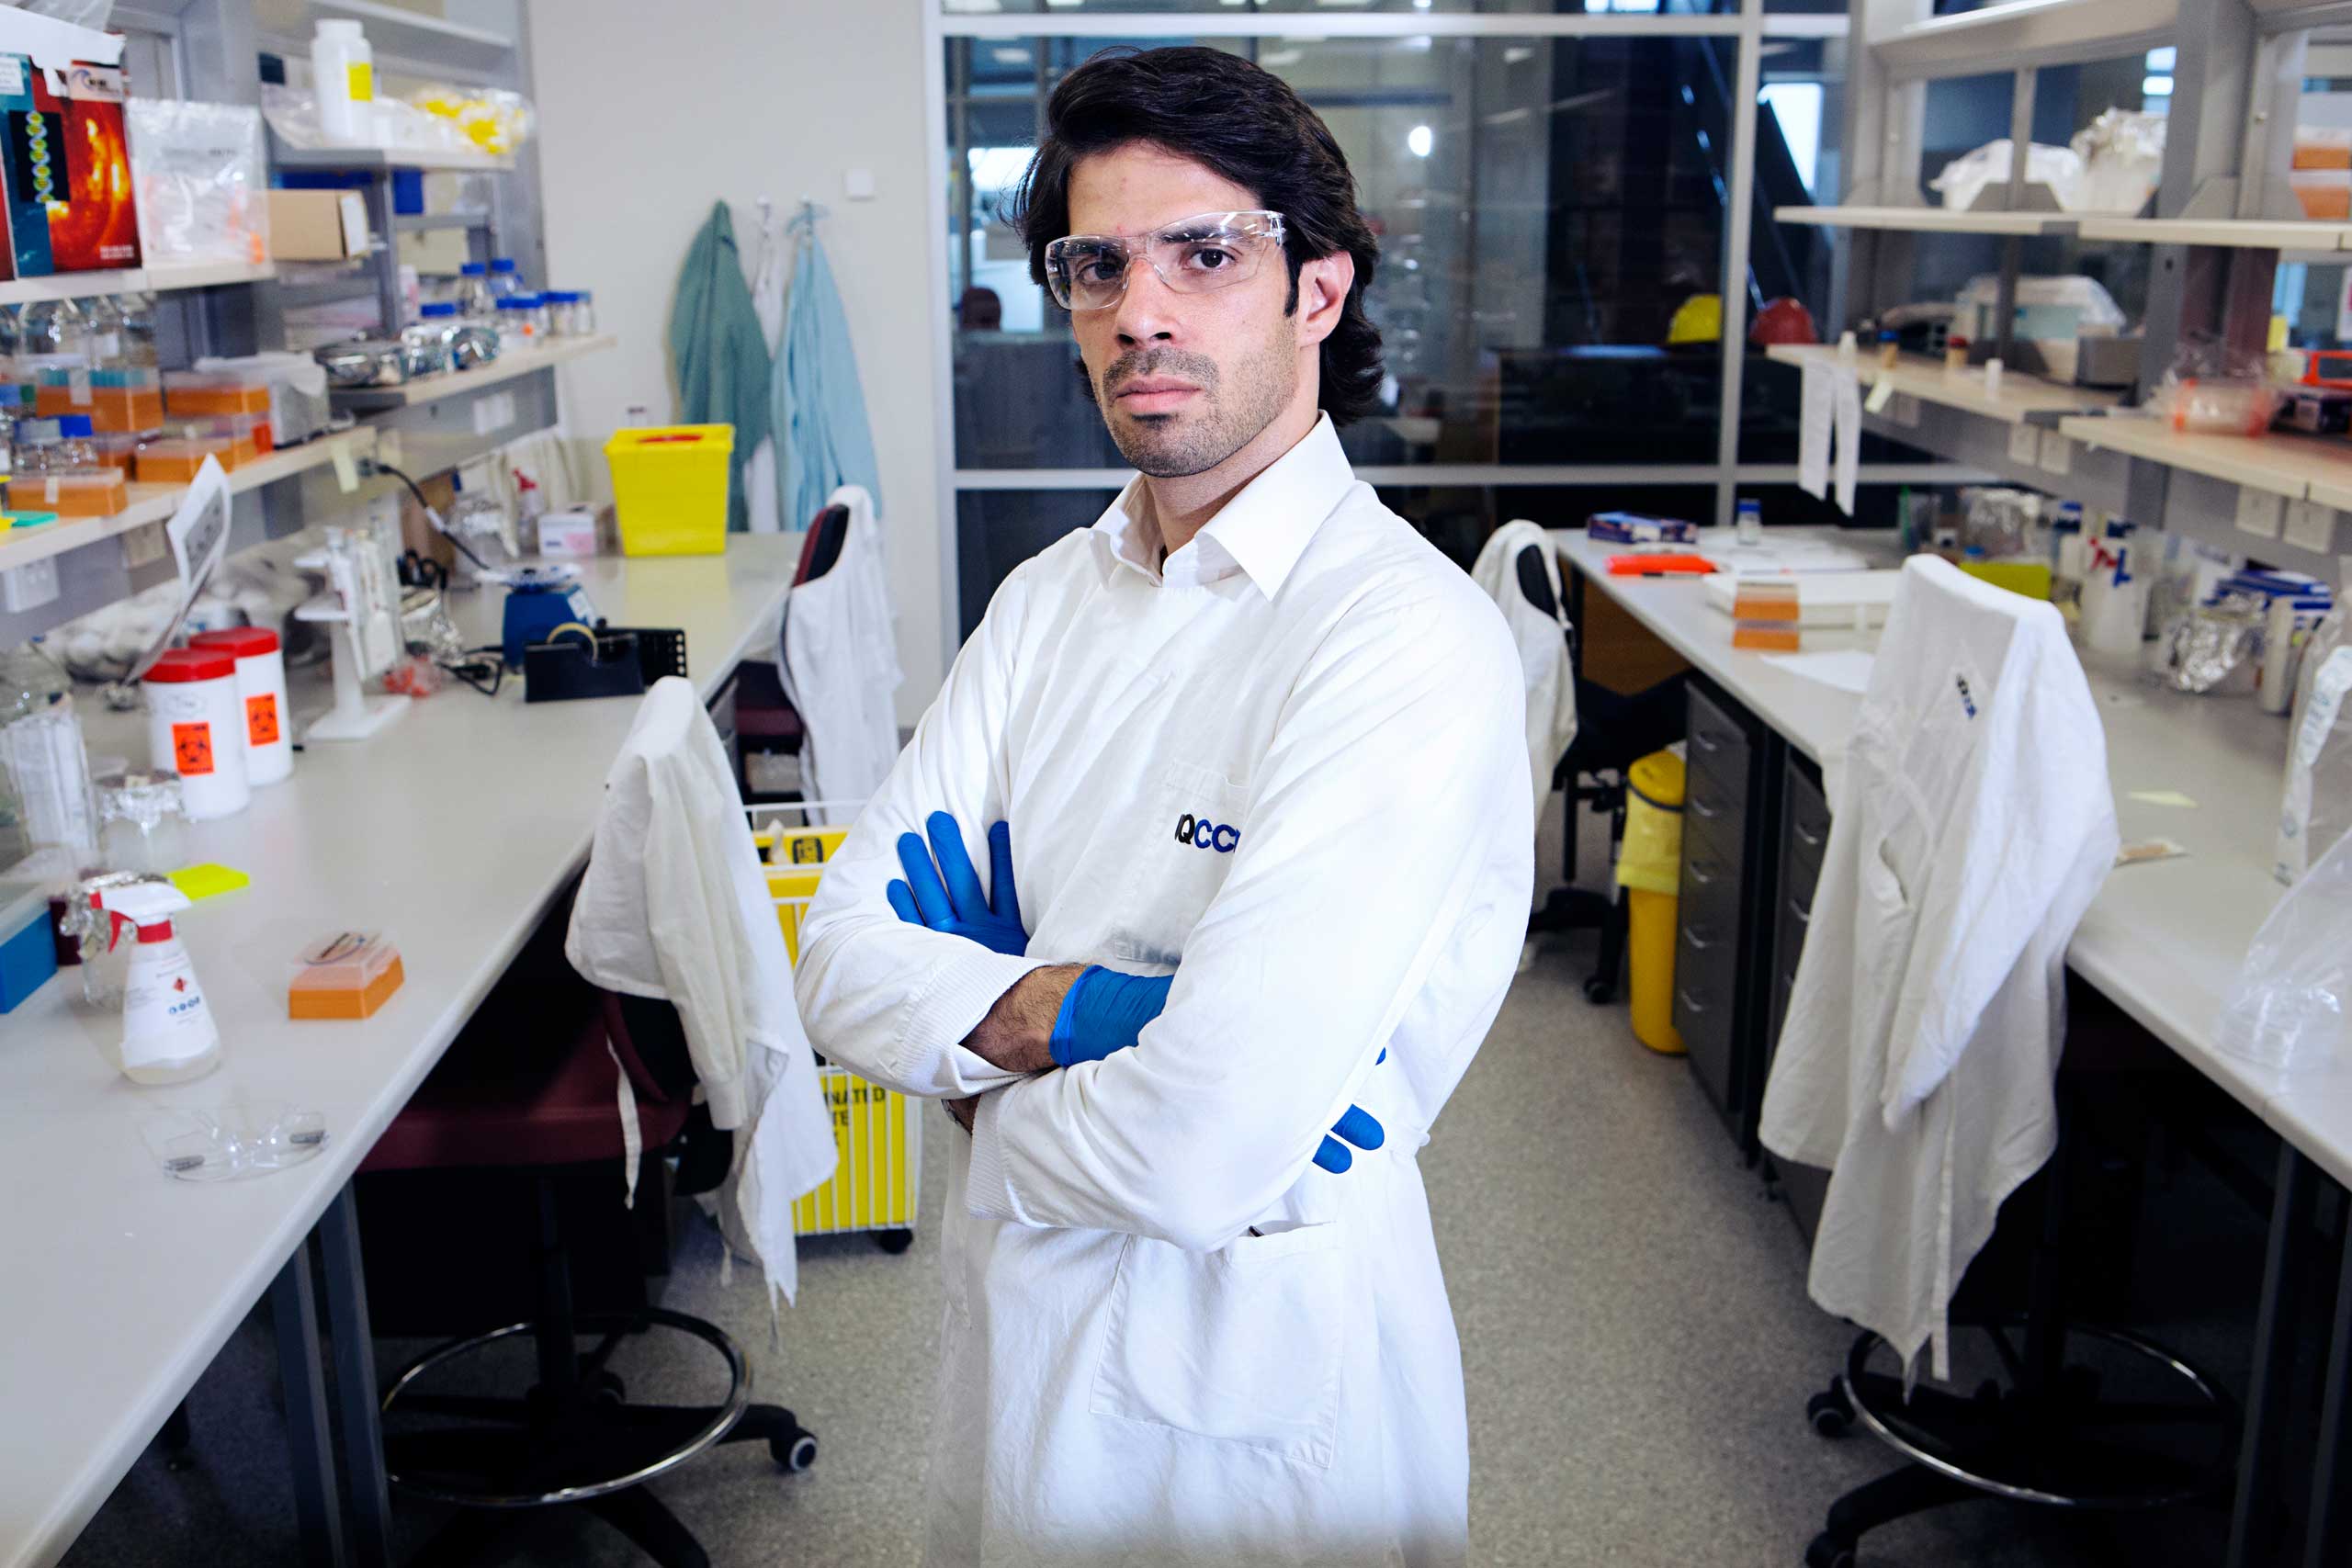 Hosam Mamoon Zowawi in his laboratory at the University of Queensland Centre for Clinical Research on Nov. 7, 2014 in Brisbane, Australia.